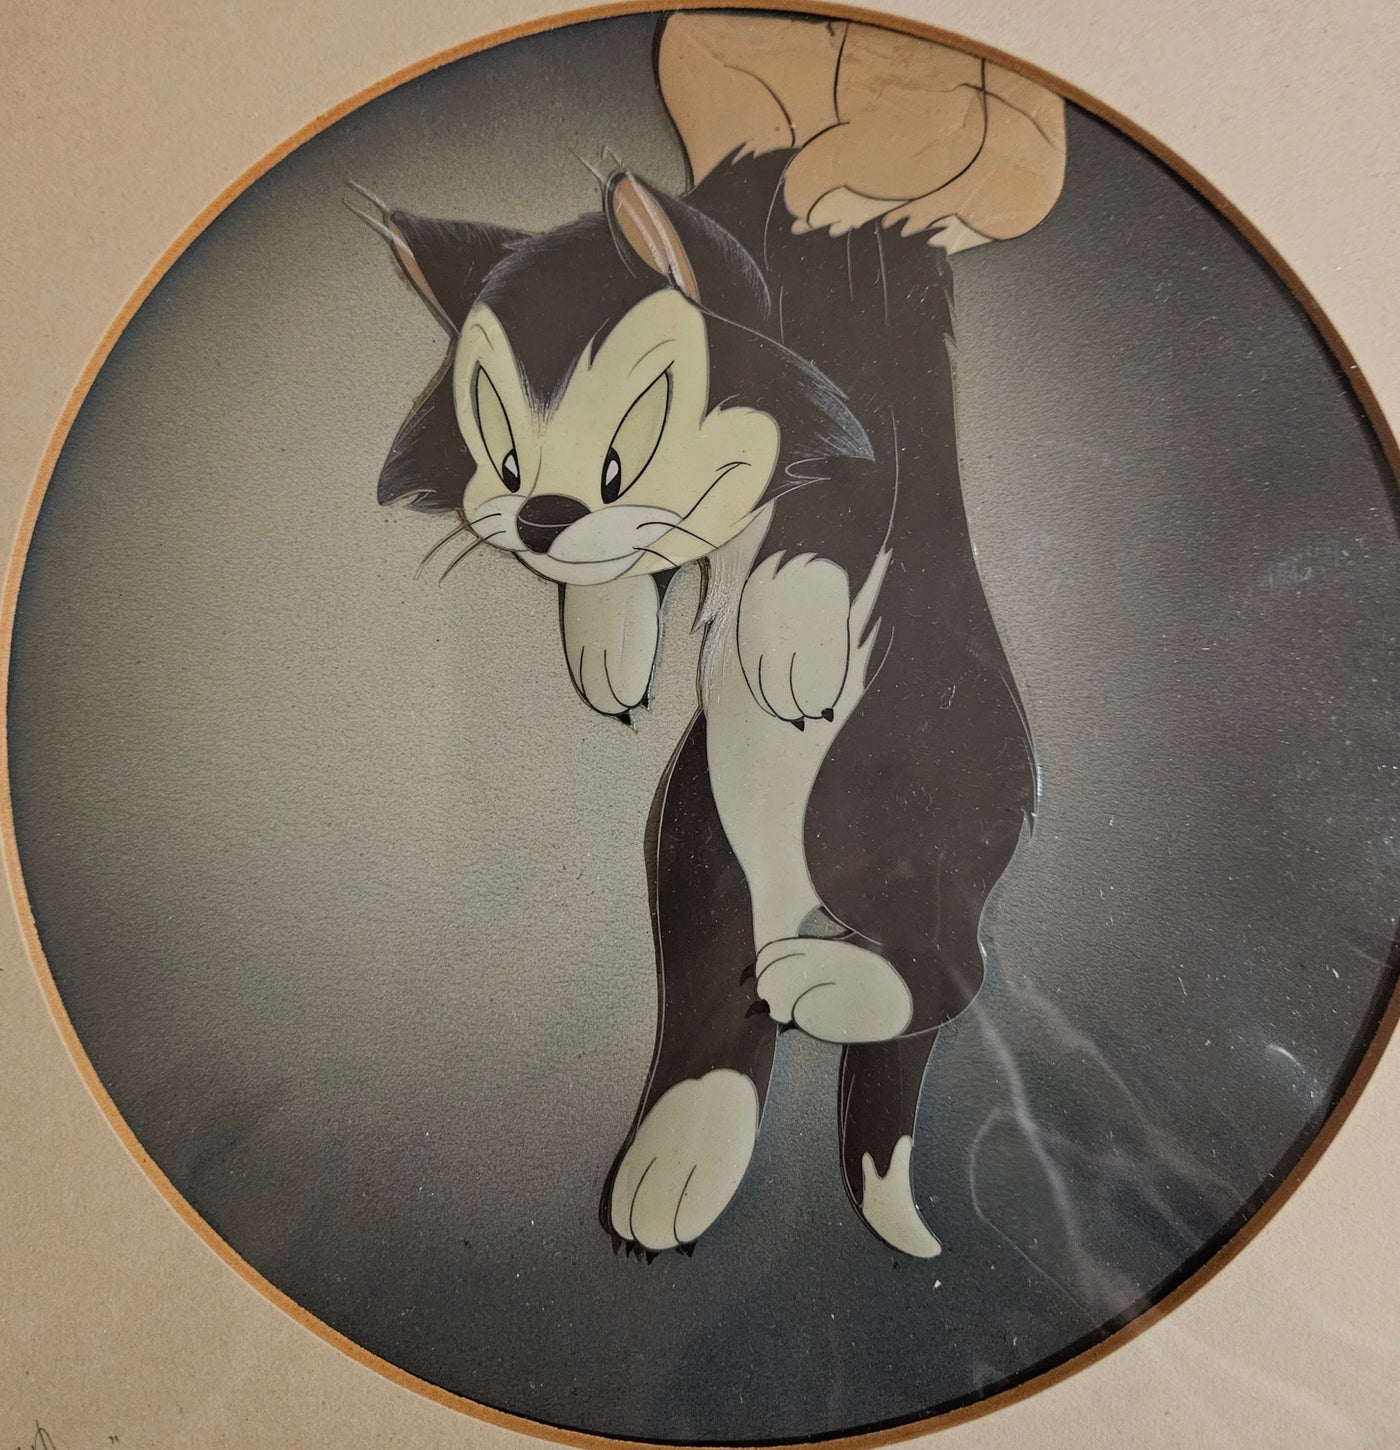 Original Walt Disney Production Cel on Courvoisier Background from Pinocchio featuring Figaro